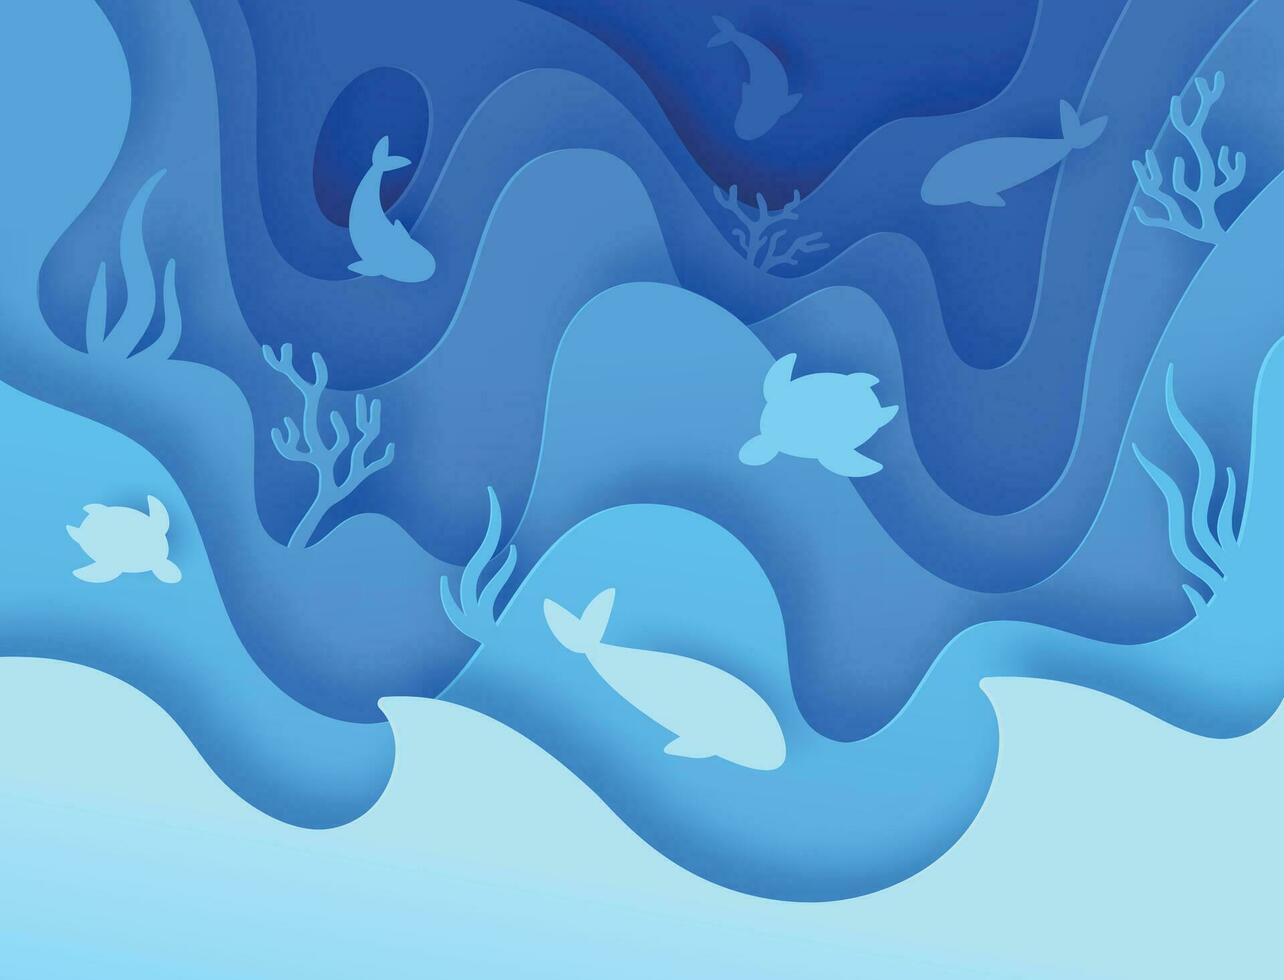 Sea life paper cut. Undersea world with reefs, corals, fish and animal silhouette. Ocean deep wildlife in 3d paper art style, vector concept